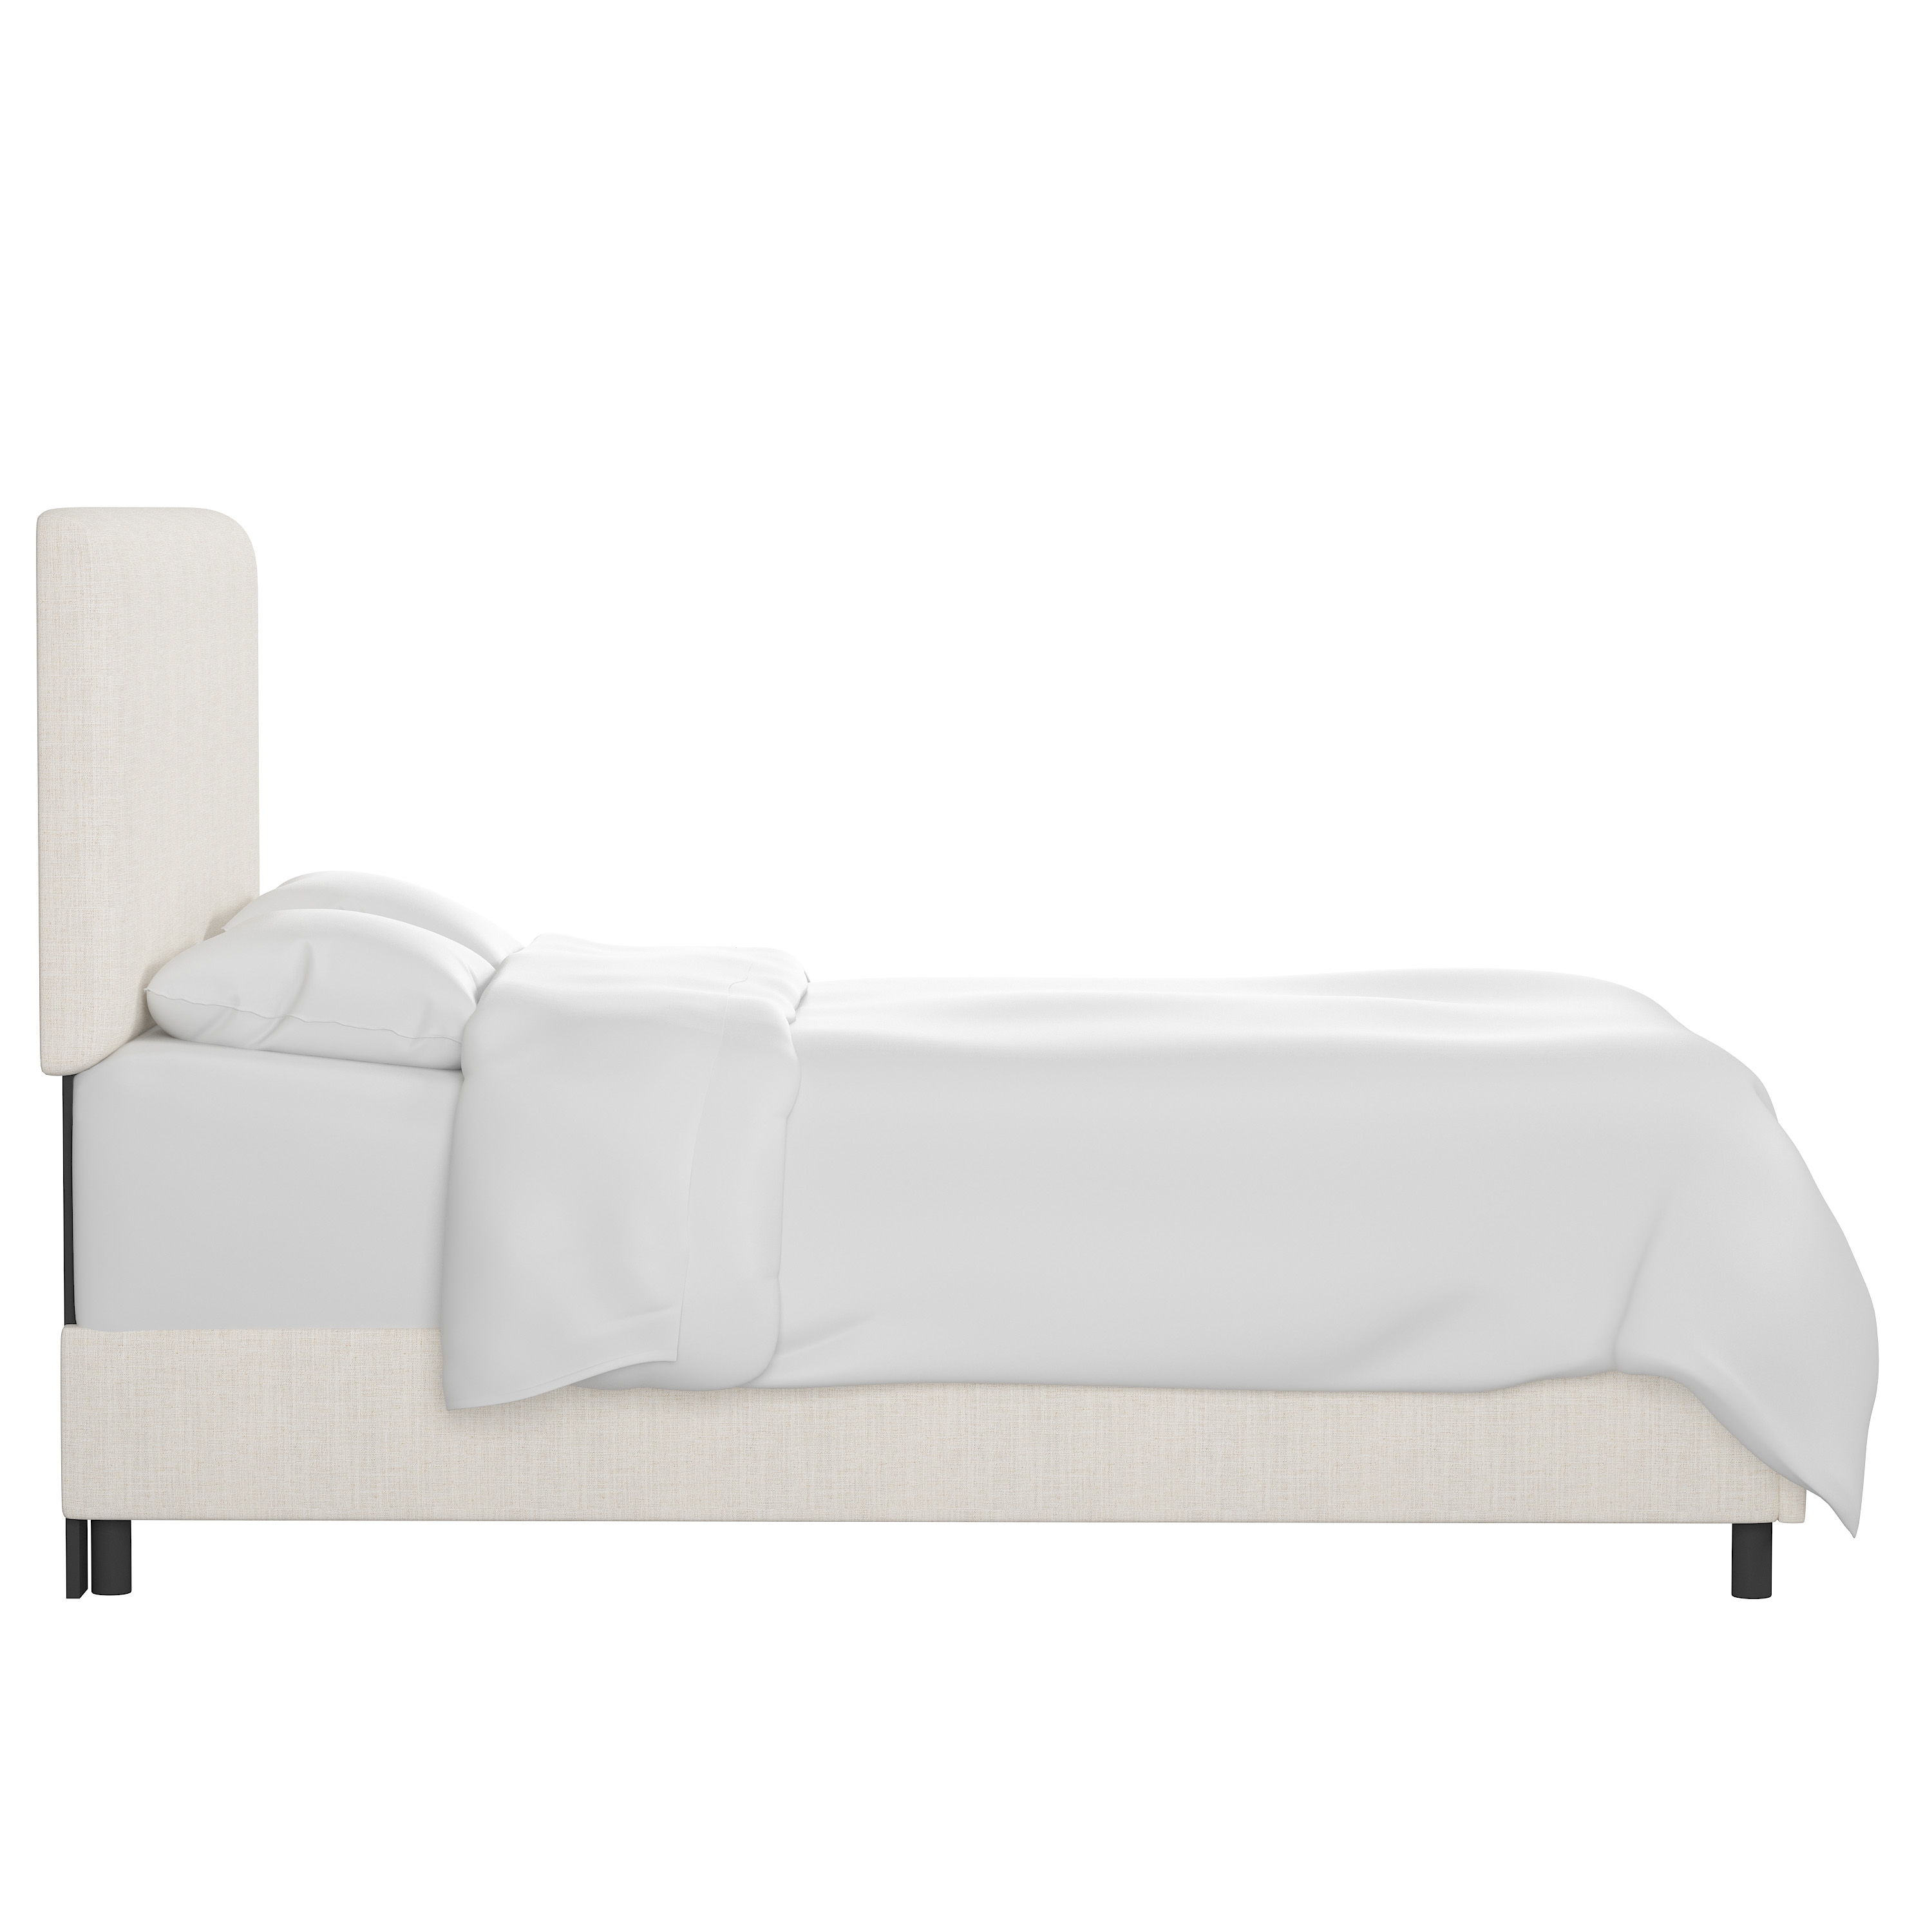 Twin Sawyer Bed in Linen Talc - Image 2